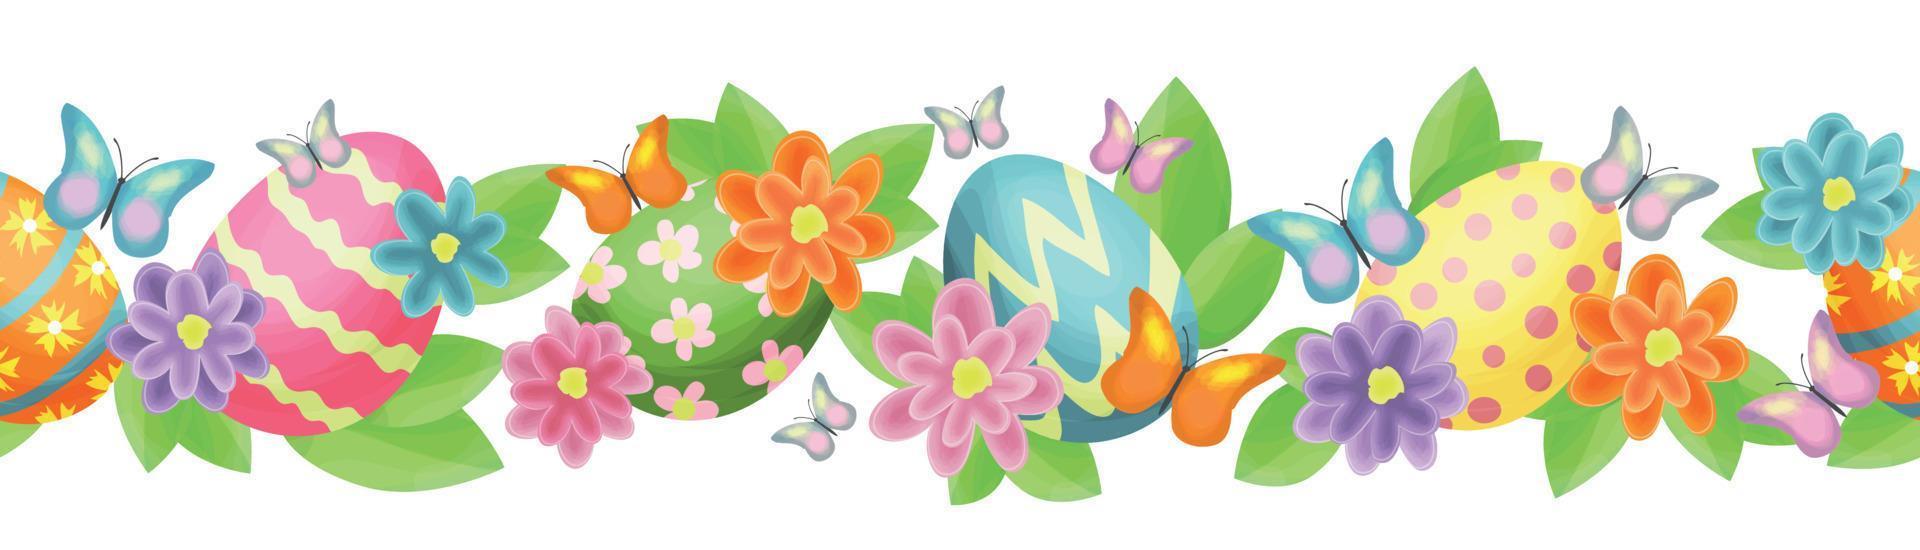 Easter horizontal seamless pattern with flowers, painted eggs and butterflies. The design is great for postcards, banners, textiles, wallpapers. vector